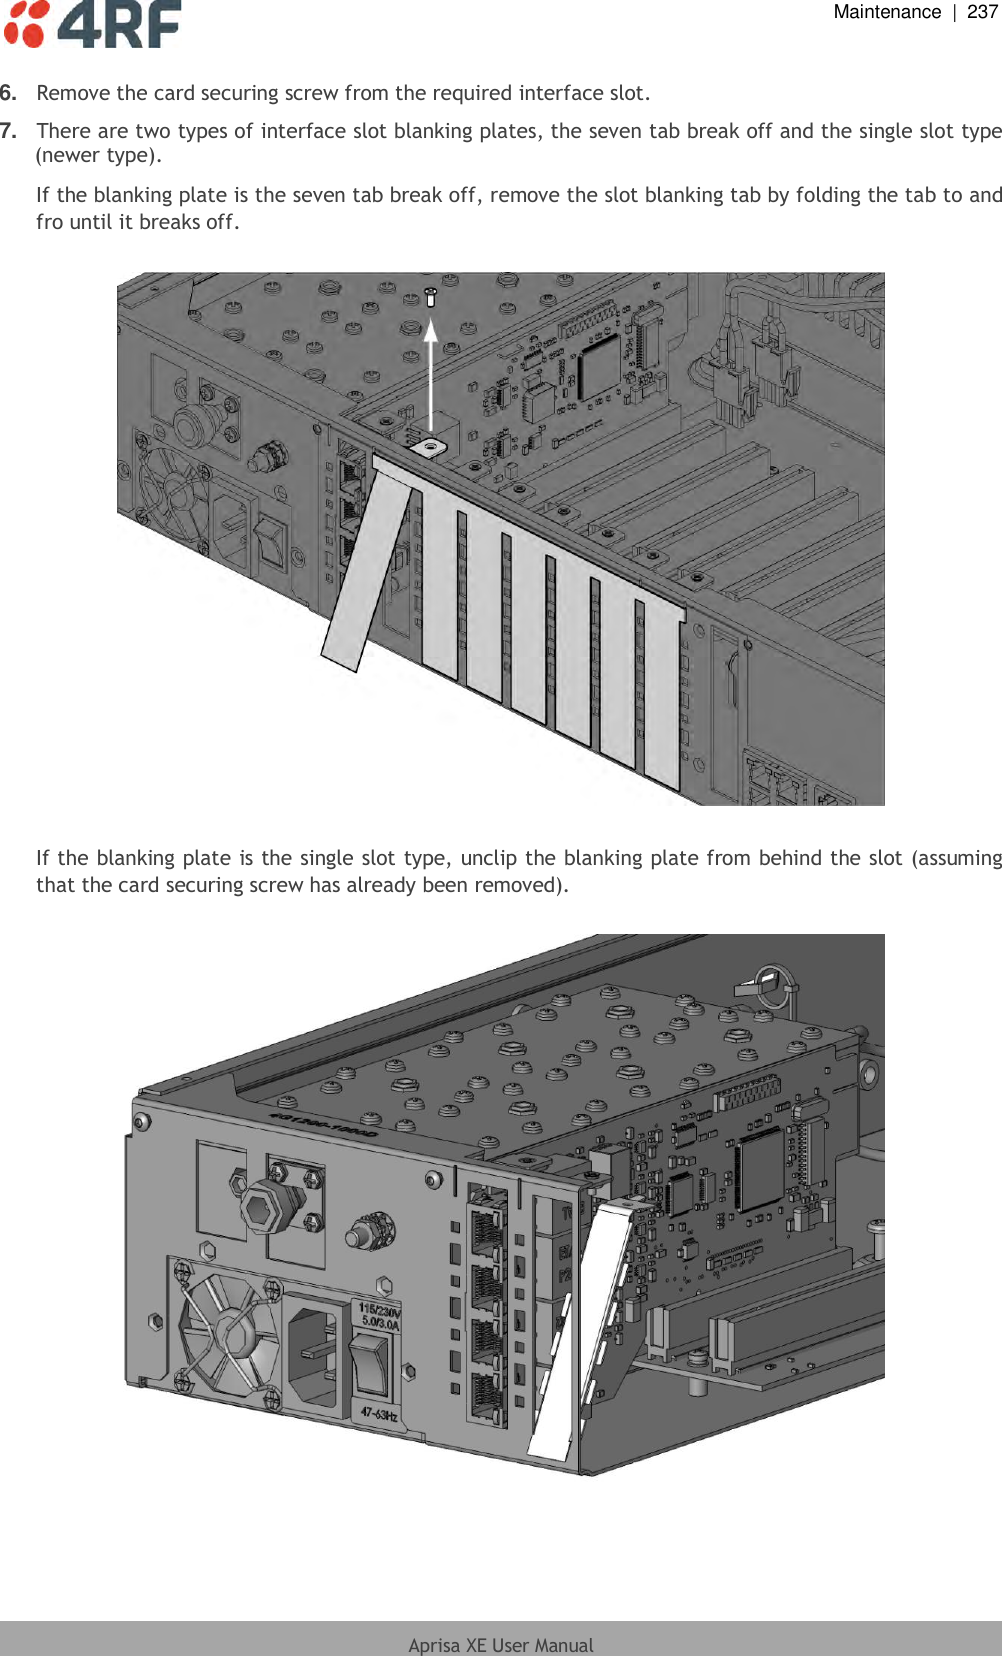  Maintenance  |  237  Aprisa XE User Manual  6. Remove the card securing screw from the required interface slot. 7. There are two types of interface slot blanking plates, the seven tab break off and the single slot type (newer type). If the blanking plate is the seven tab break off, remove the slot blanking tab by folding the tab to and fro until it breaks off.    If the blanking plate is the single slot type, unclip the blanking plate from behind the slot (assuming that the card securing screw has already been removed).    